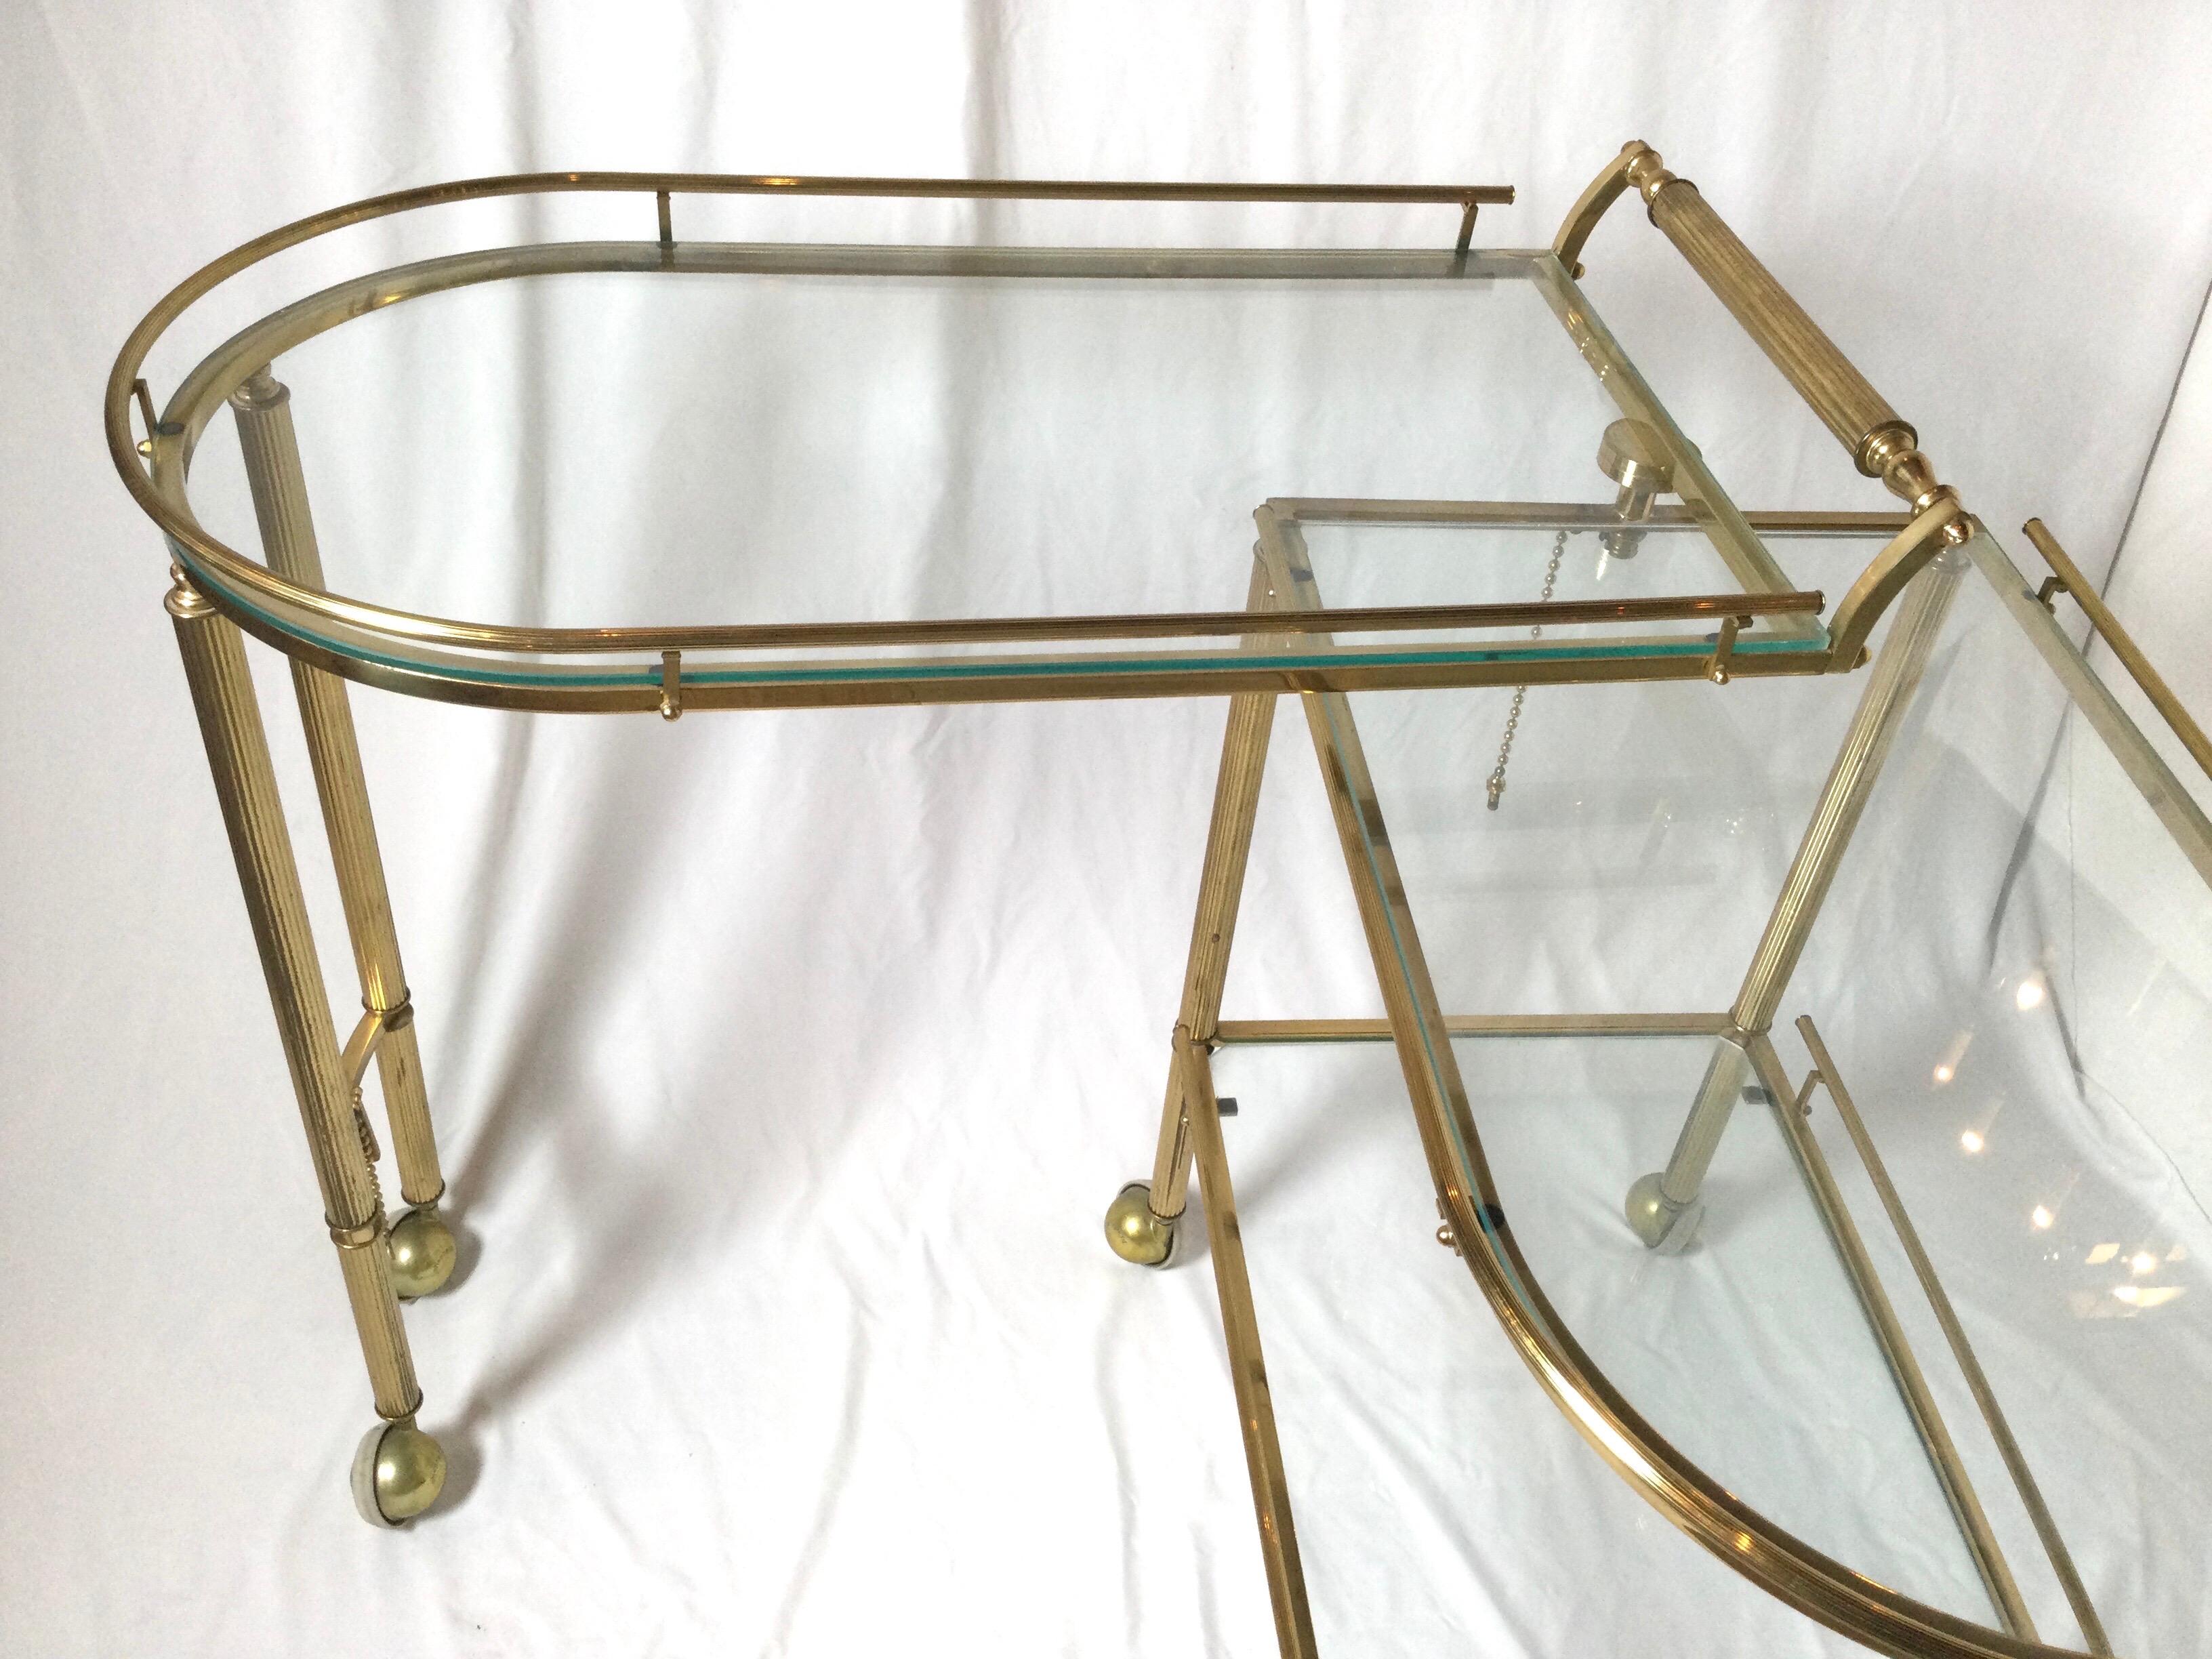 Midcentury brass and glass Italian swing out bar cart. This is a great piece for every day and party. You can have it closed for every day and open it up for those bigger events. Three glass shelves and the bottom section swings out. Nice ball wheel